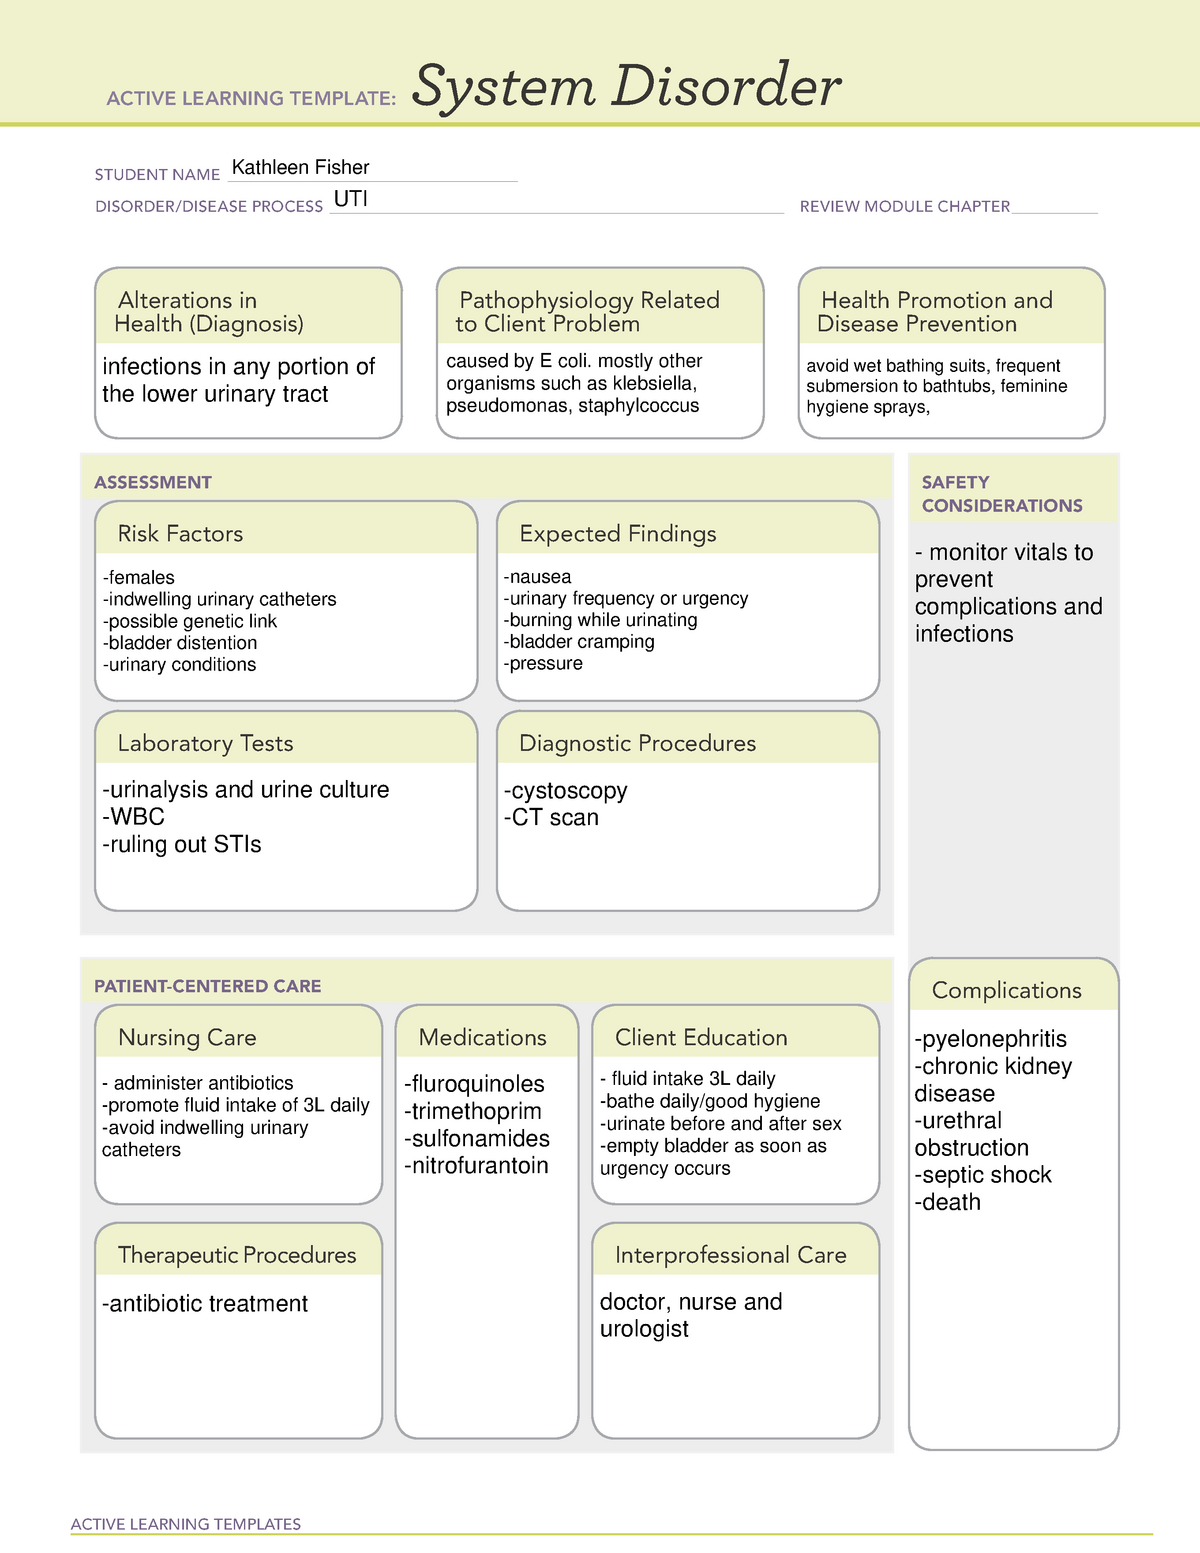 Systemdisorder UTI ATI medication/system template ACTIVE LEARNING